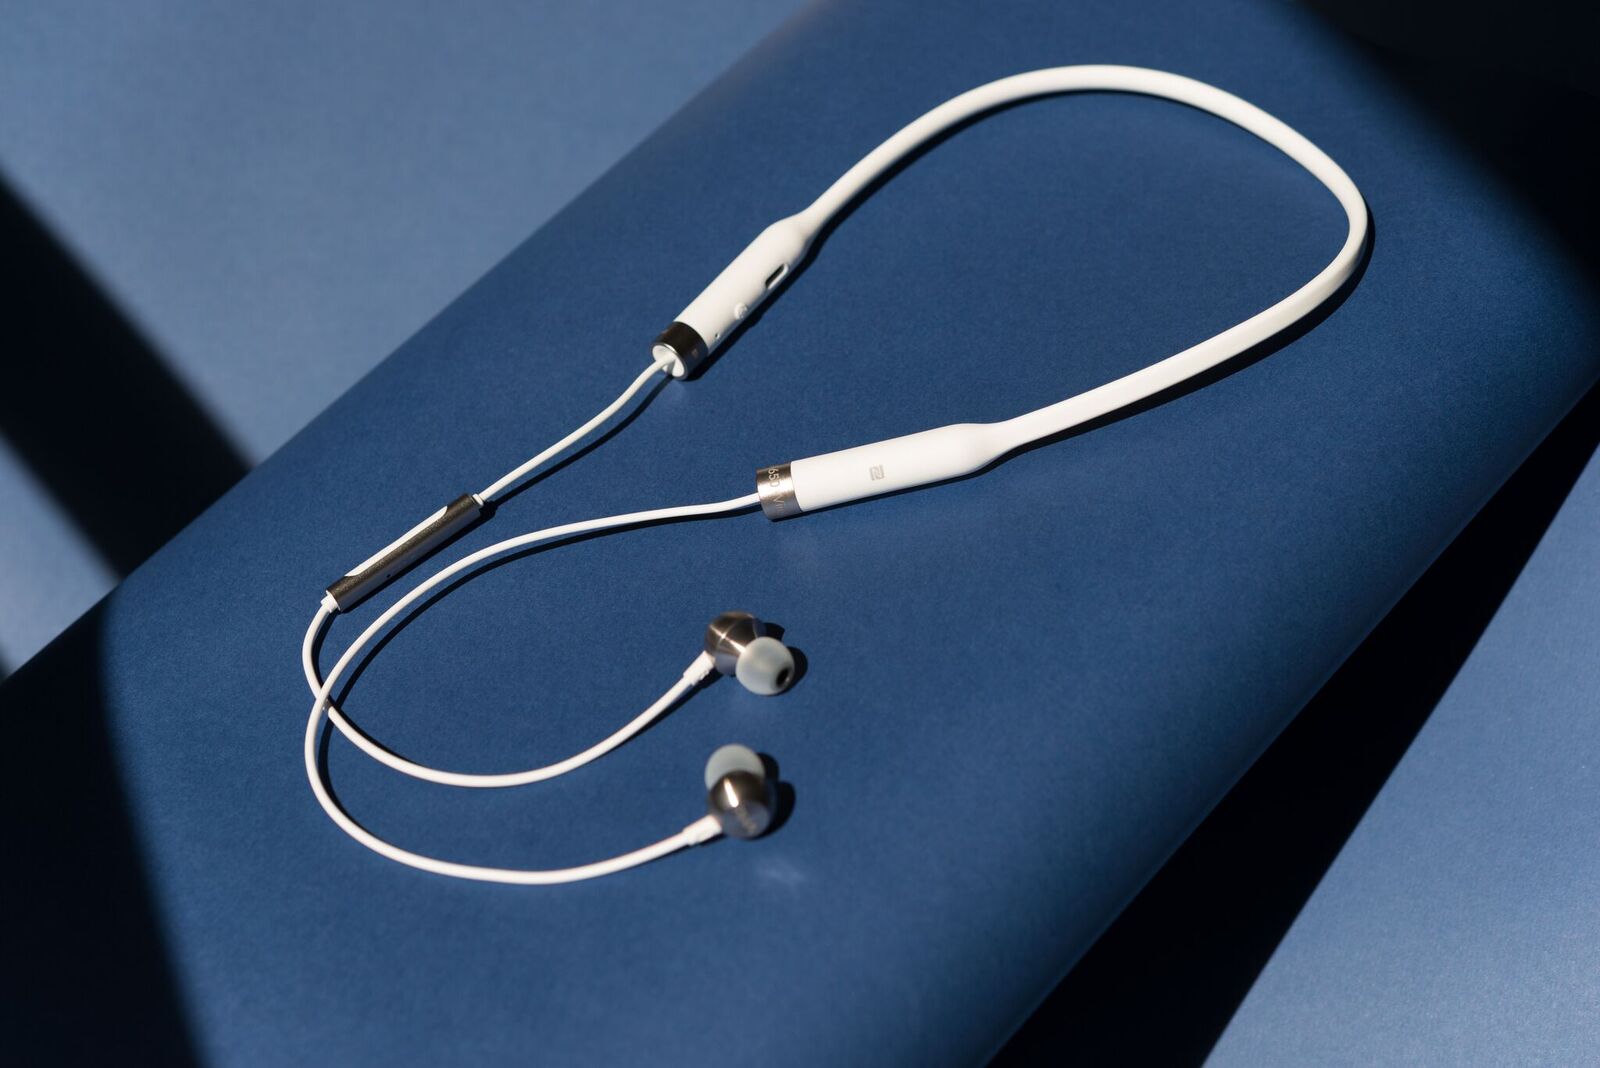 OF SOUND MIND AND BODY: RHA INTRODUCES MA650 WIRELESS HEADPHONE IN WHITE